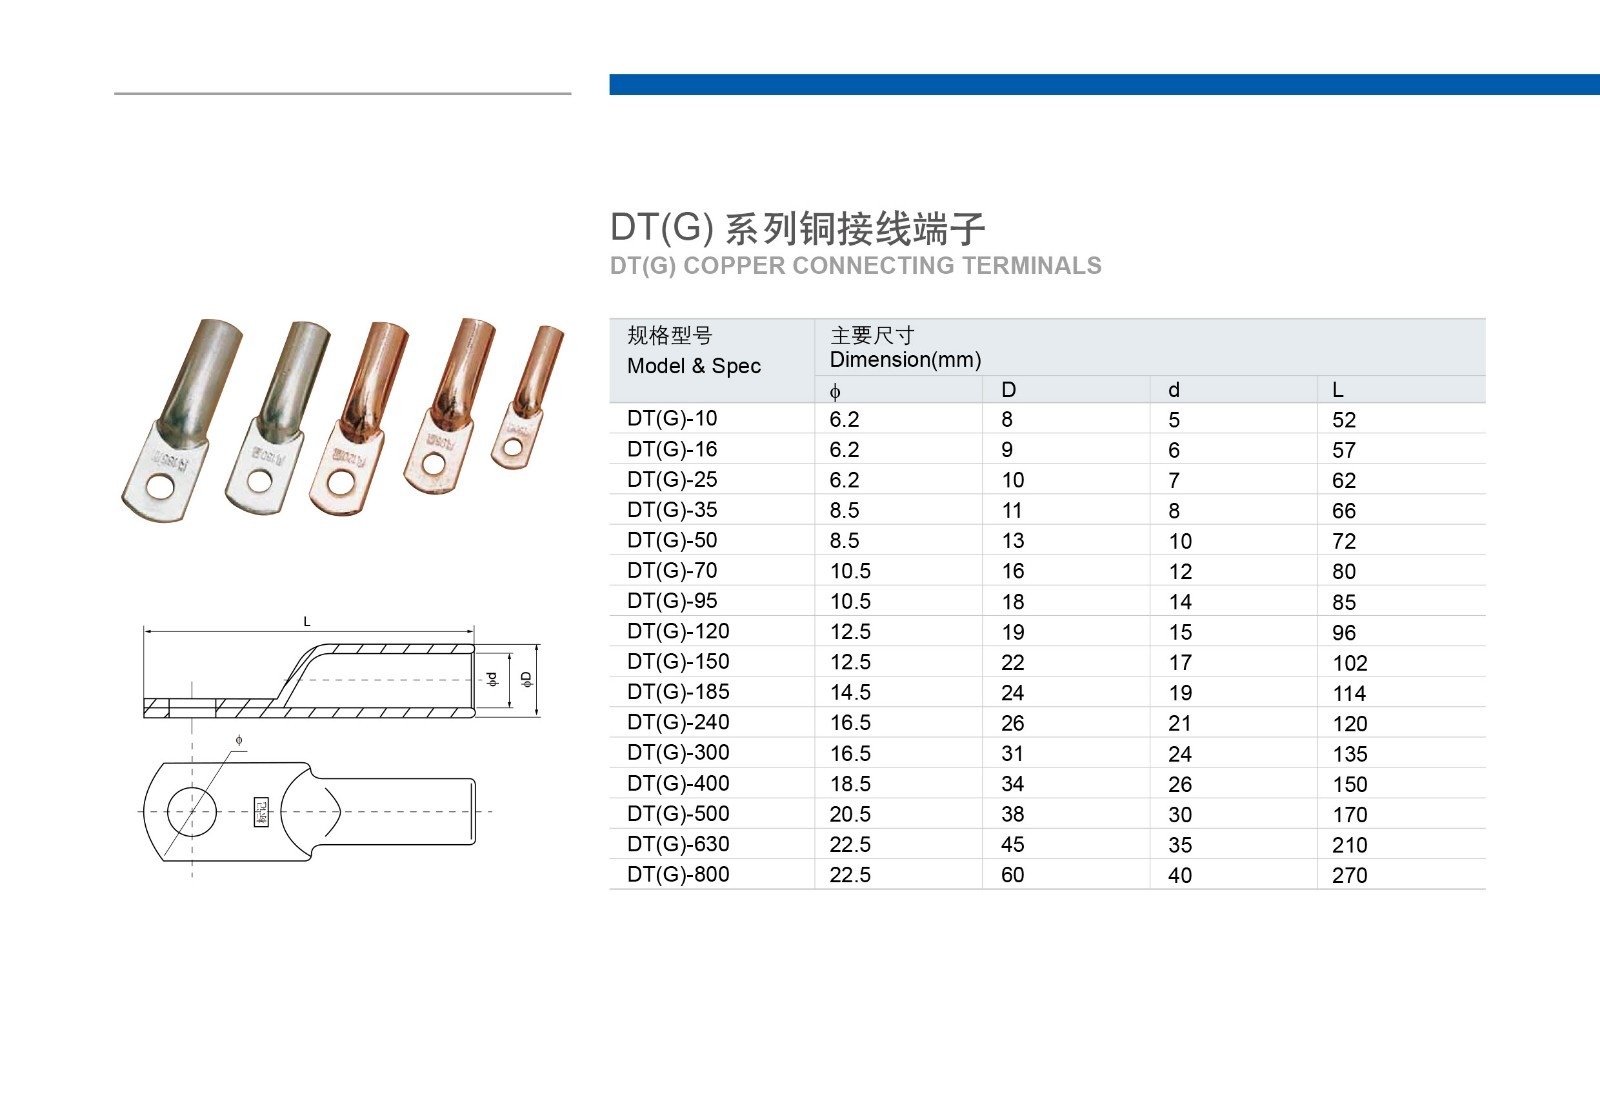 stable cable connector directly sale for lathe